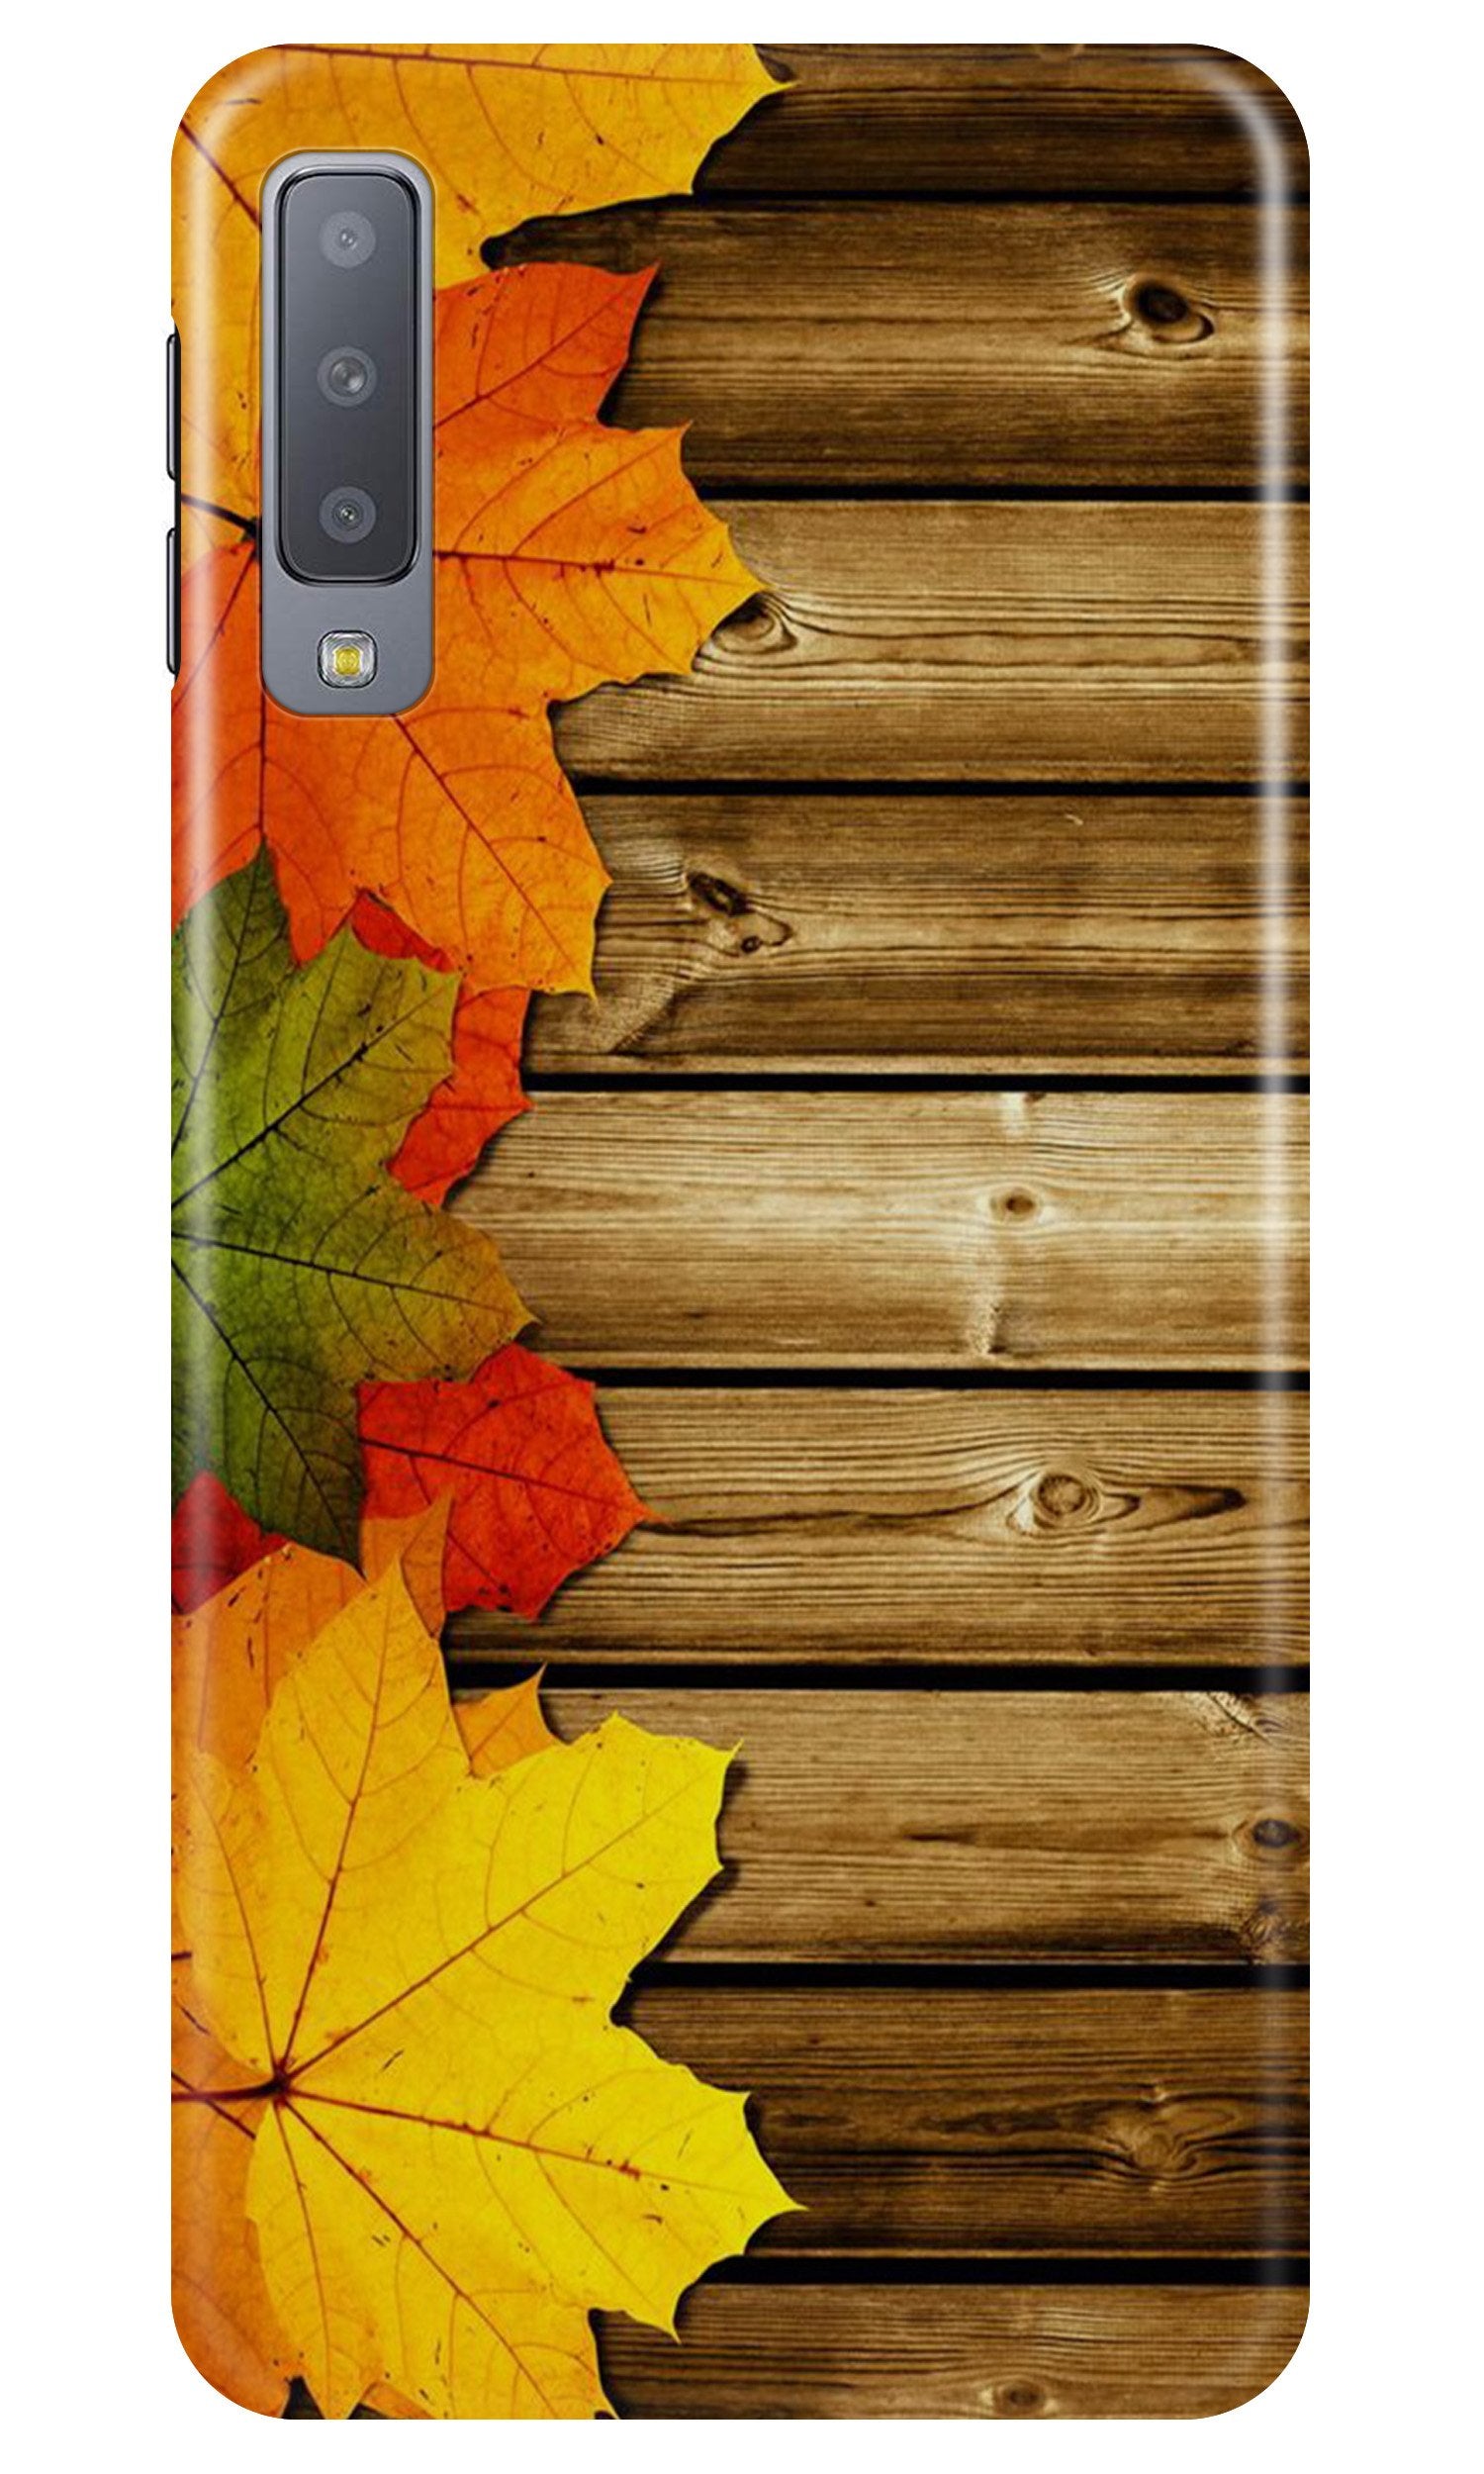 Wooden look3 Case for Samung Galaxy A70s